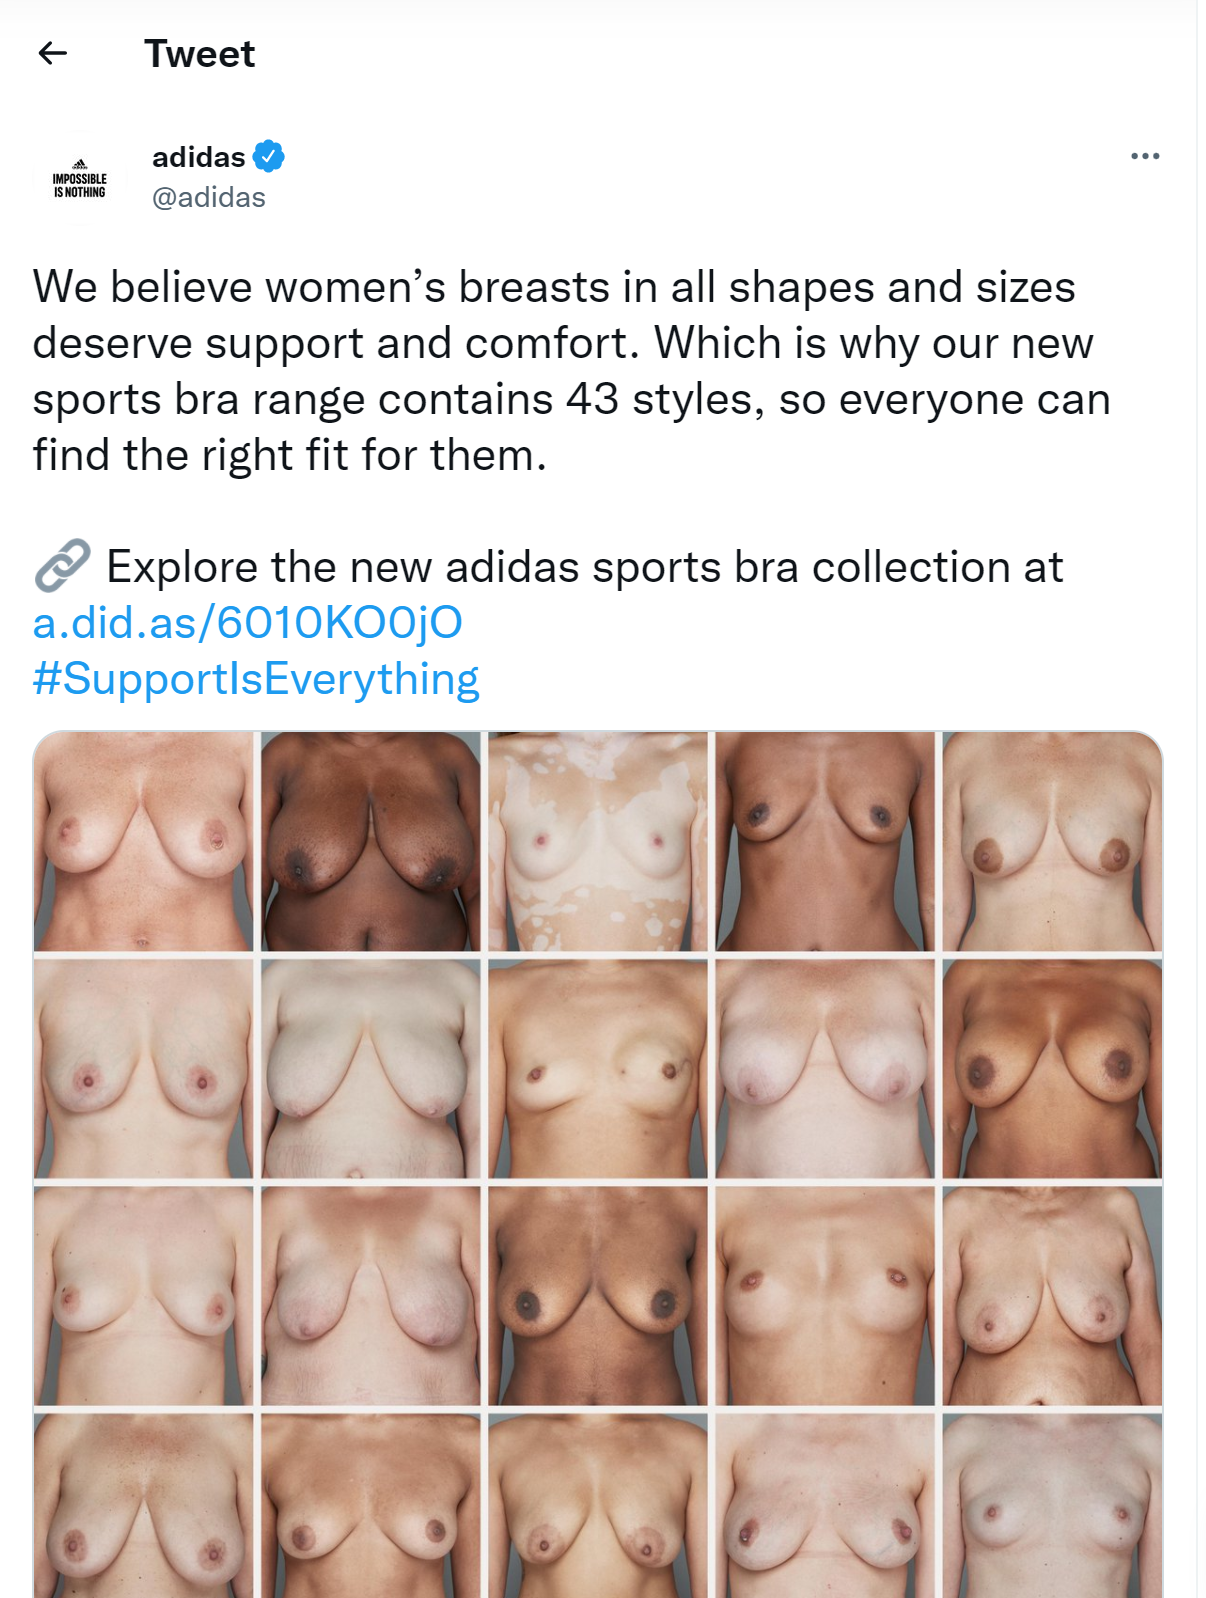 The Adidas Twitter post banned by the ASA. (ASA/PA)